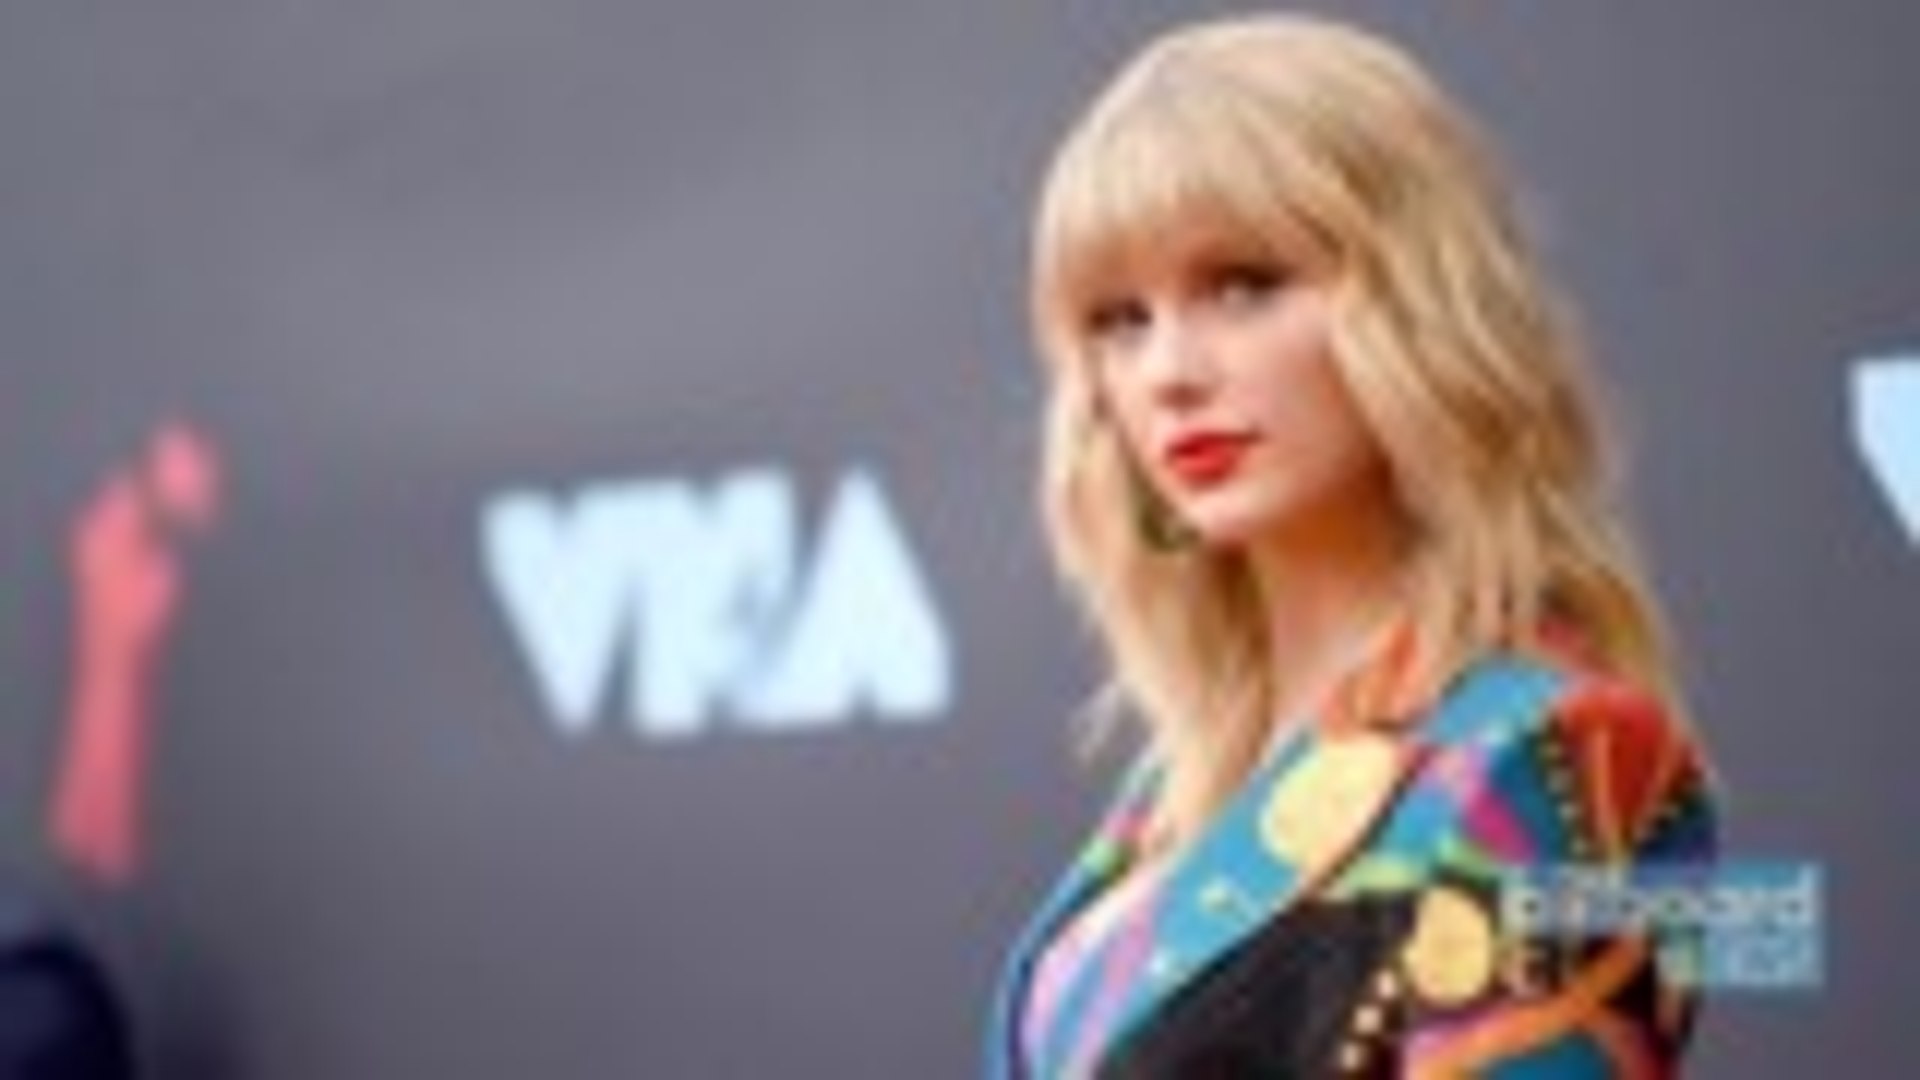 Inside Look at Taylor Swift as Mega Mentor on 'The Voice' | Billboard News